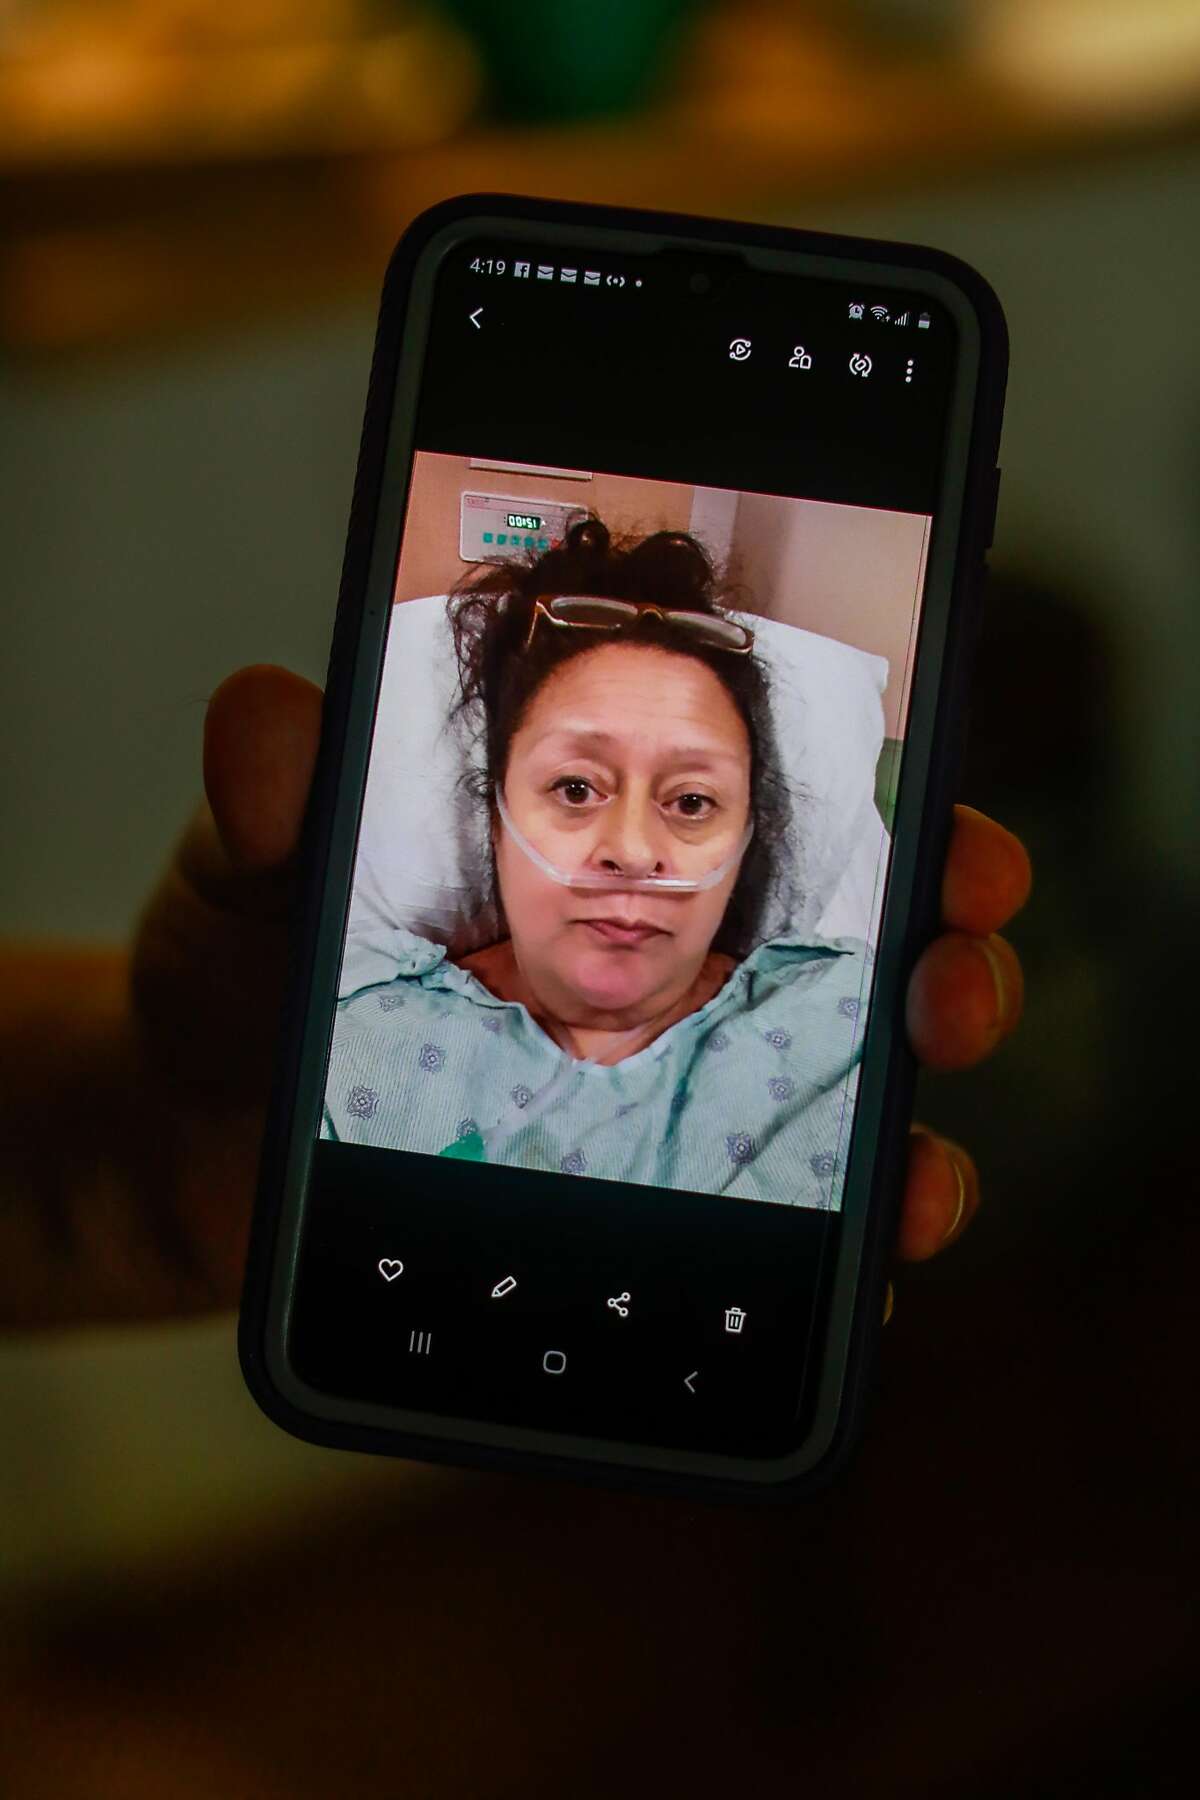 Charlotte Juarez shows a photo from her phone from when she was in the hospital on Thursday, Sept. 24, 2020 in Burlingame, California. Charlotte was in the hospital with the coronavirus in June and is still experiencing lingering effects including fatigue and heart palpitations.